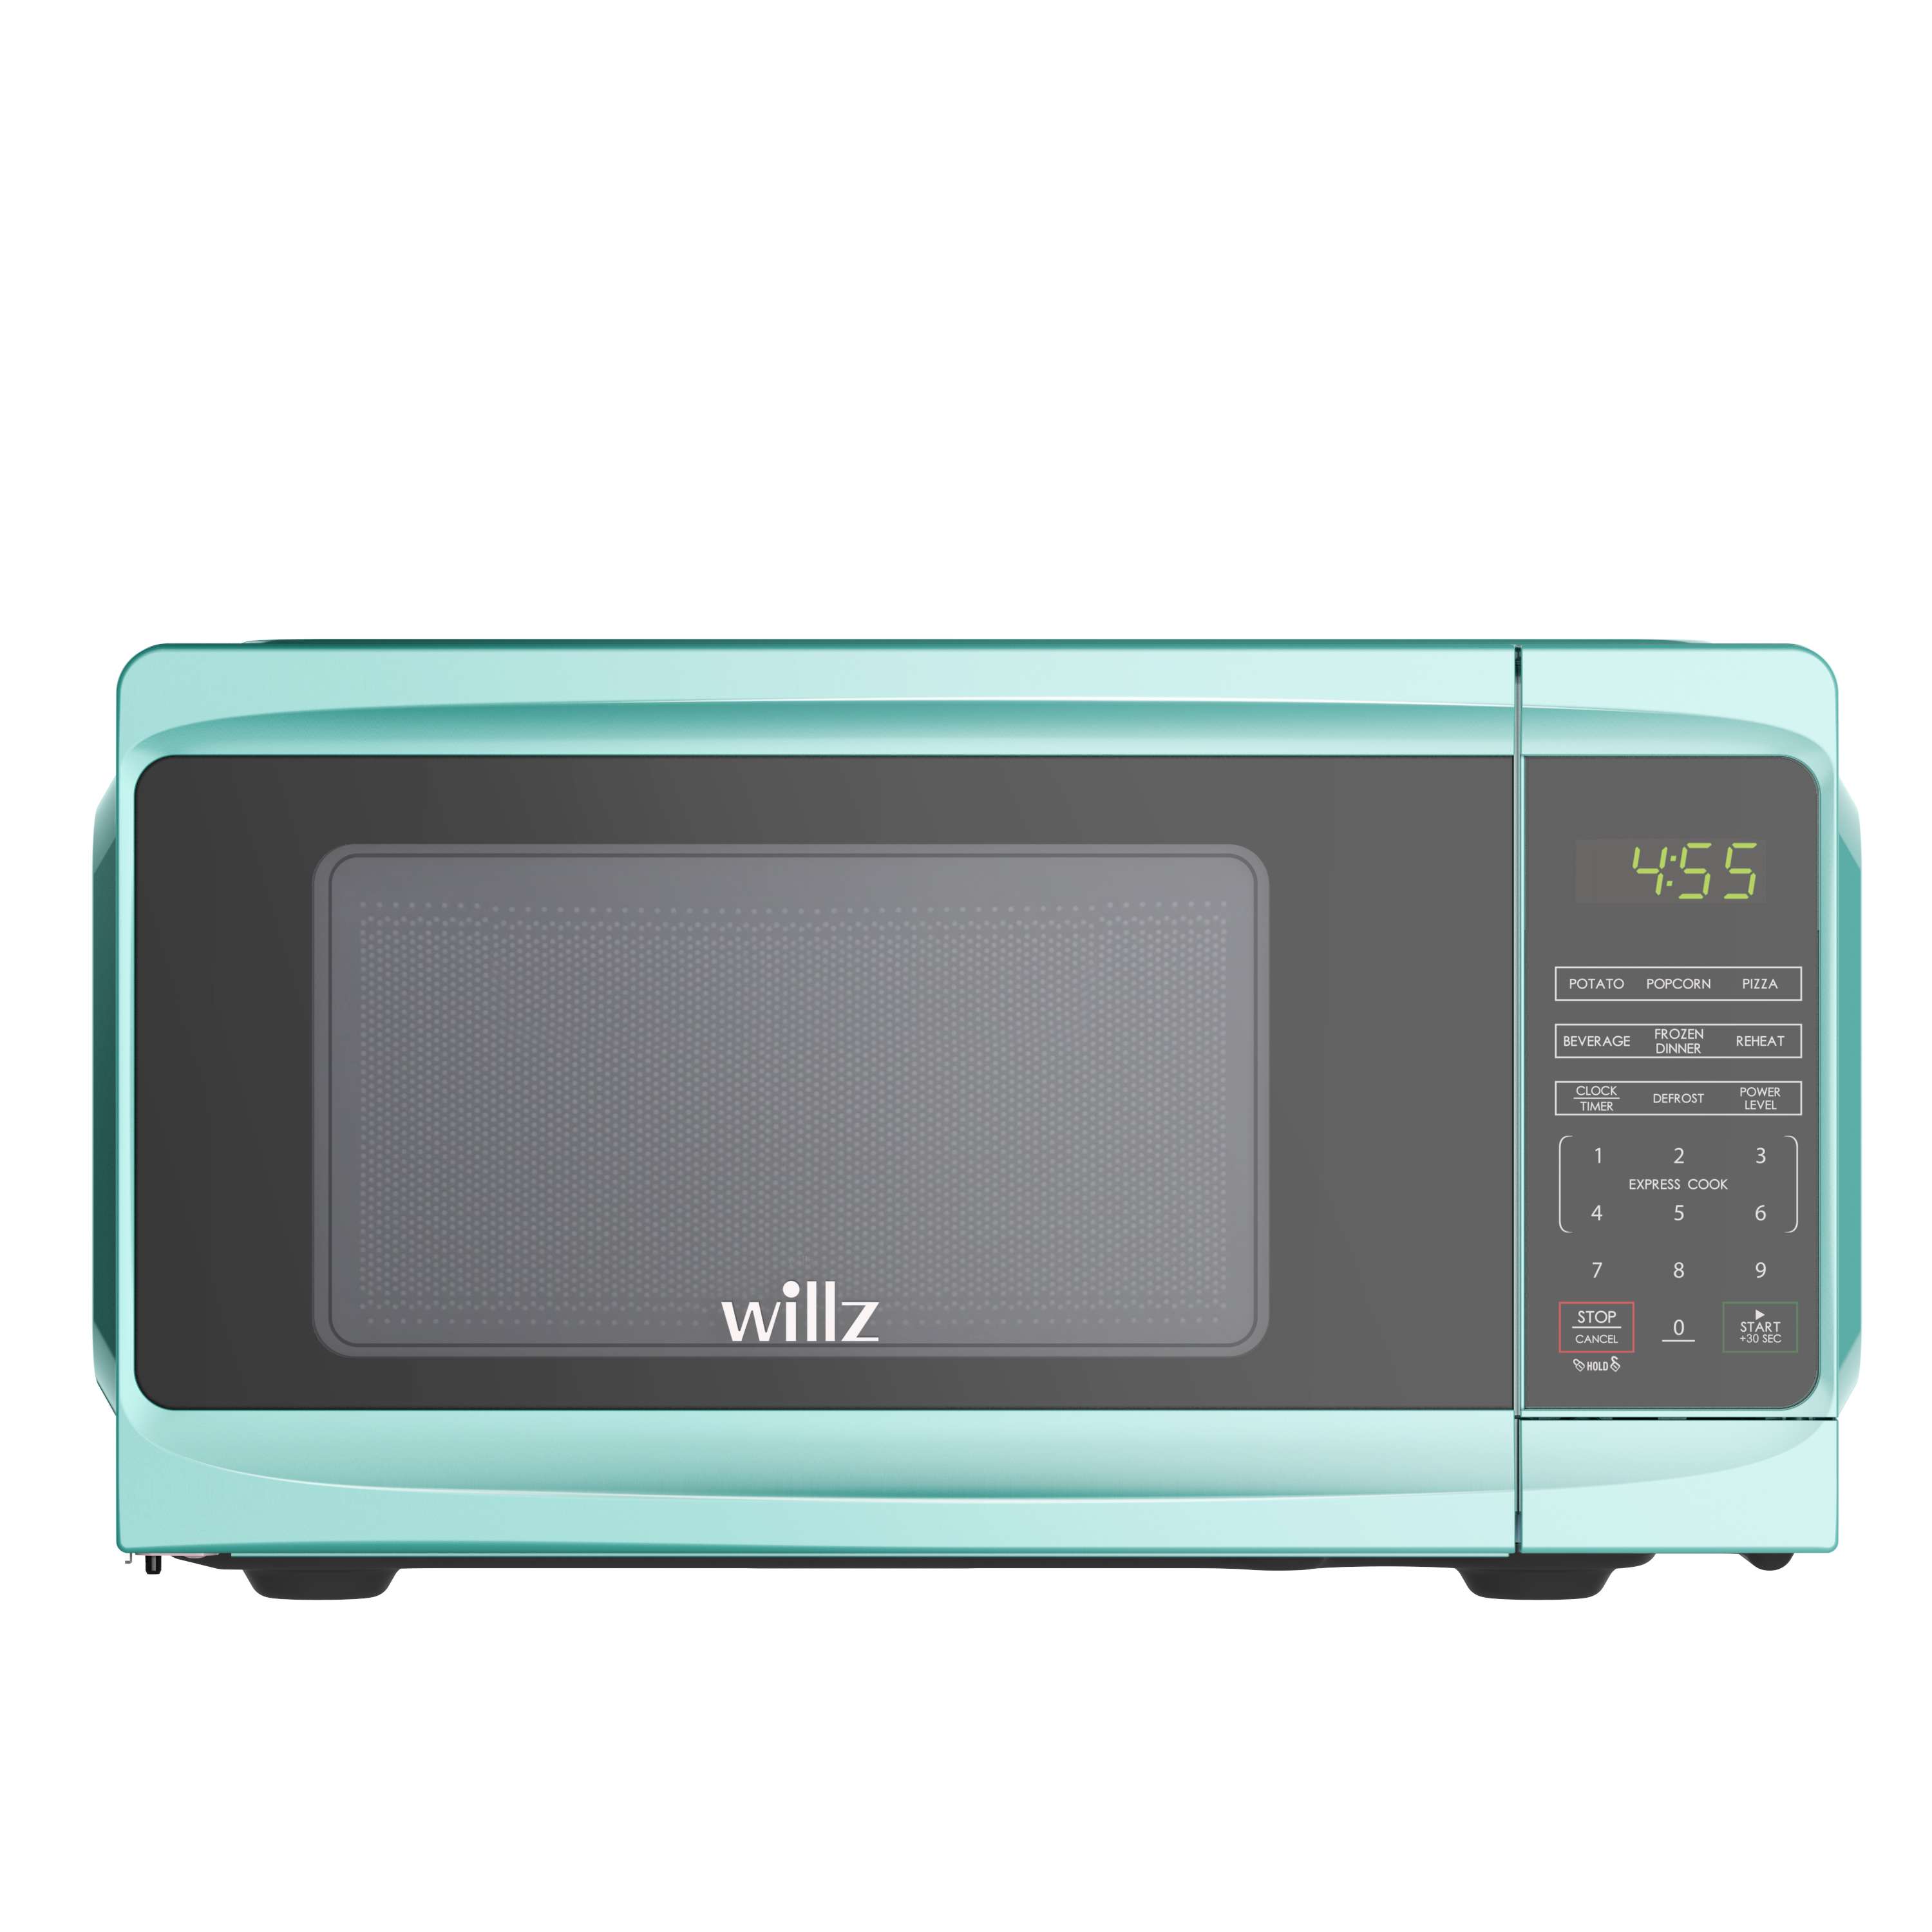 Willz WLCMV807GN-07 0.7 Cu.Ft. Countertop Microwave Oven, Green - image 1 of 7